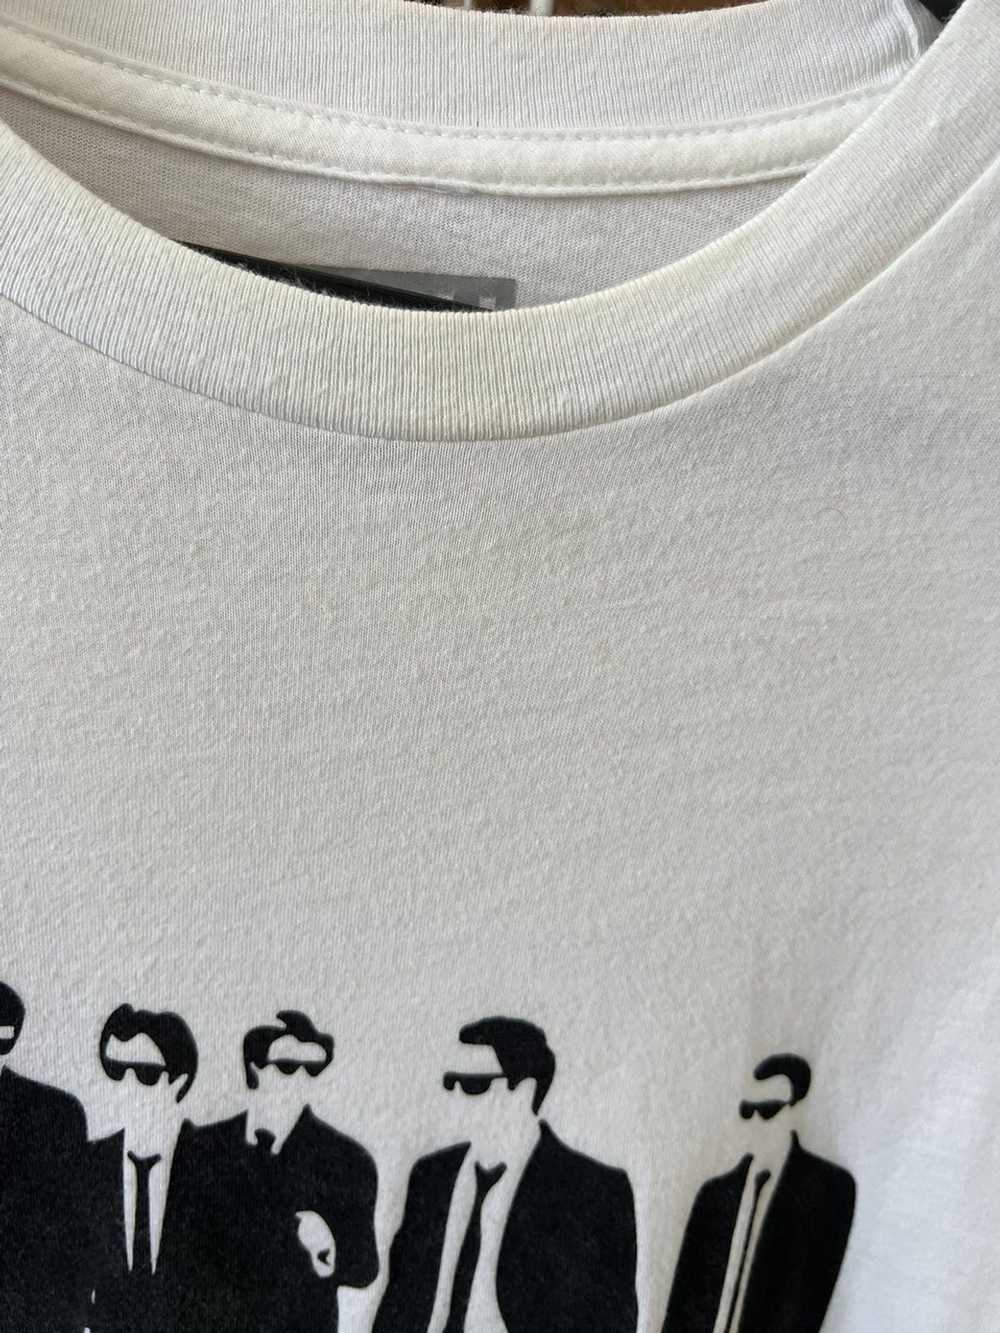 Kith Kith just us reservoir dogs t shirt size m - image 8